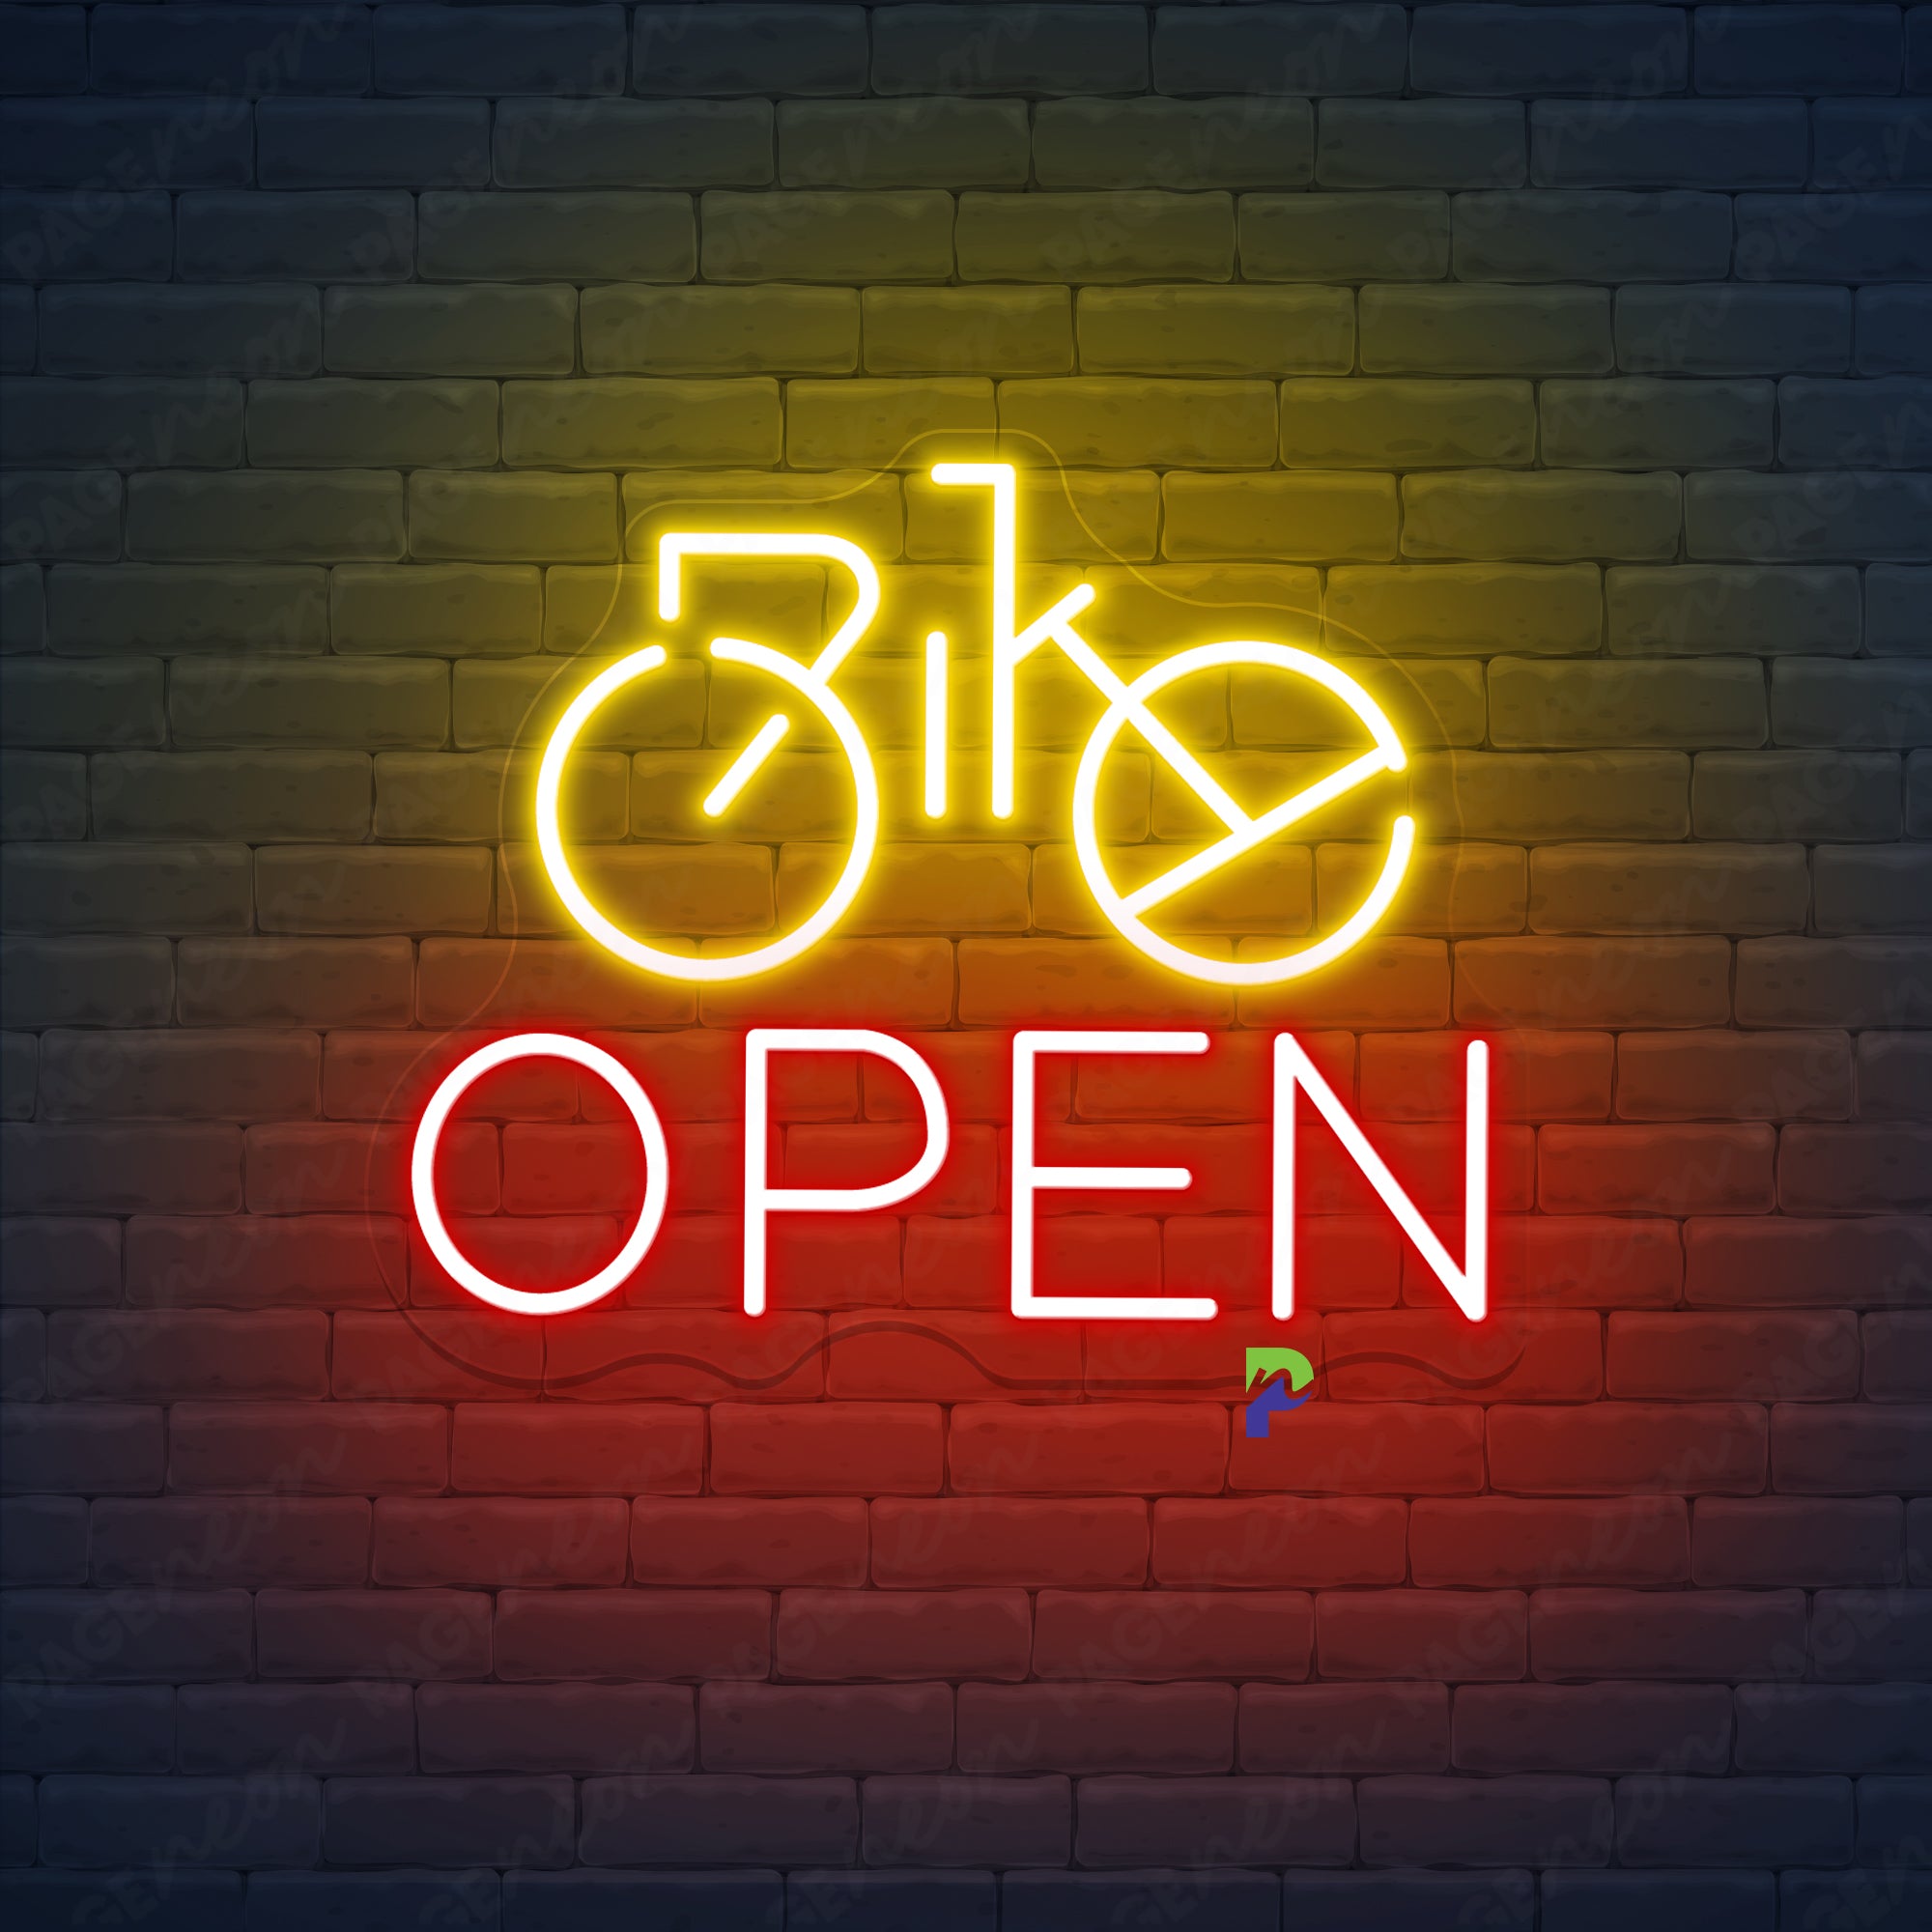 Bicycle Neon Signs Bike Open Led Light